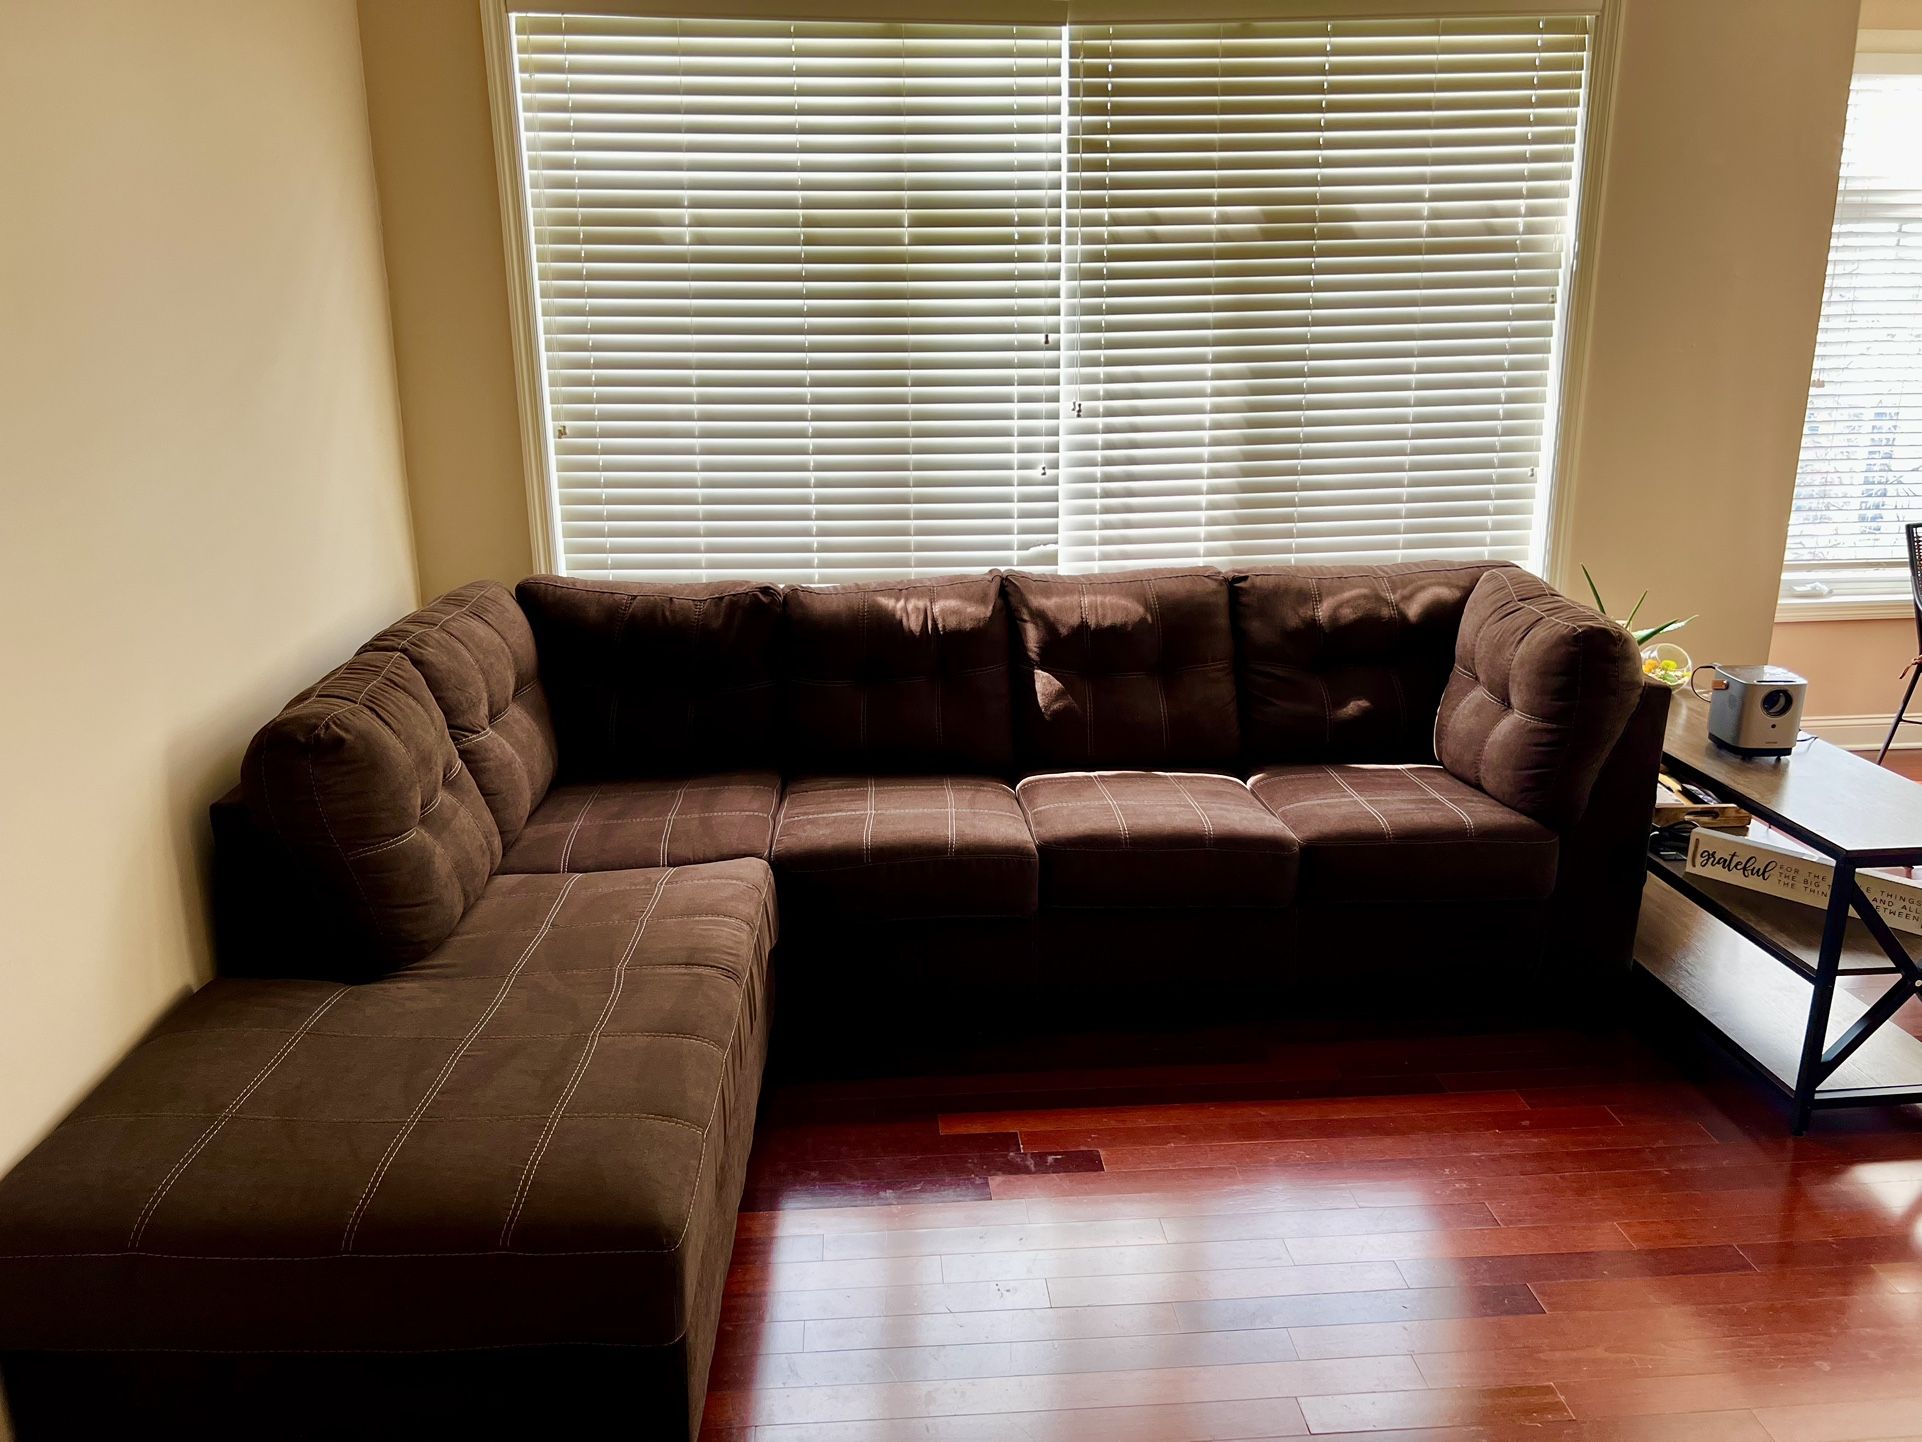 Sectional sleeper sofa - Excellent condition!!!